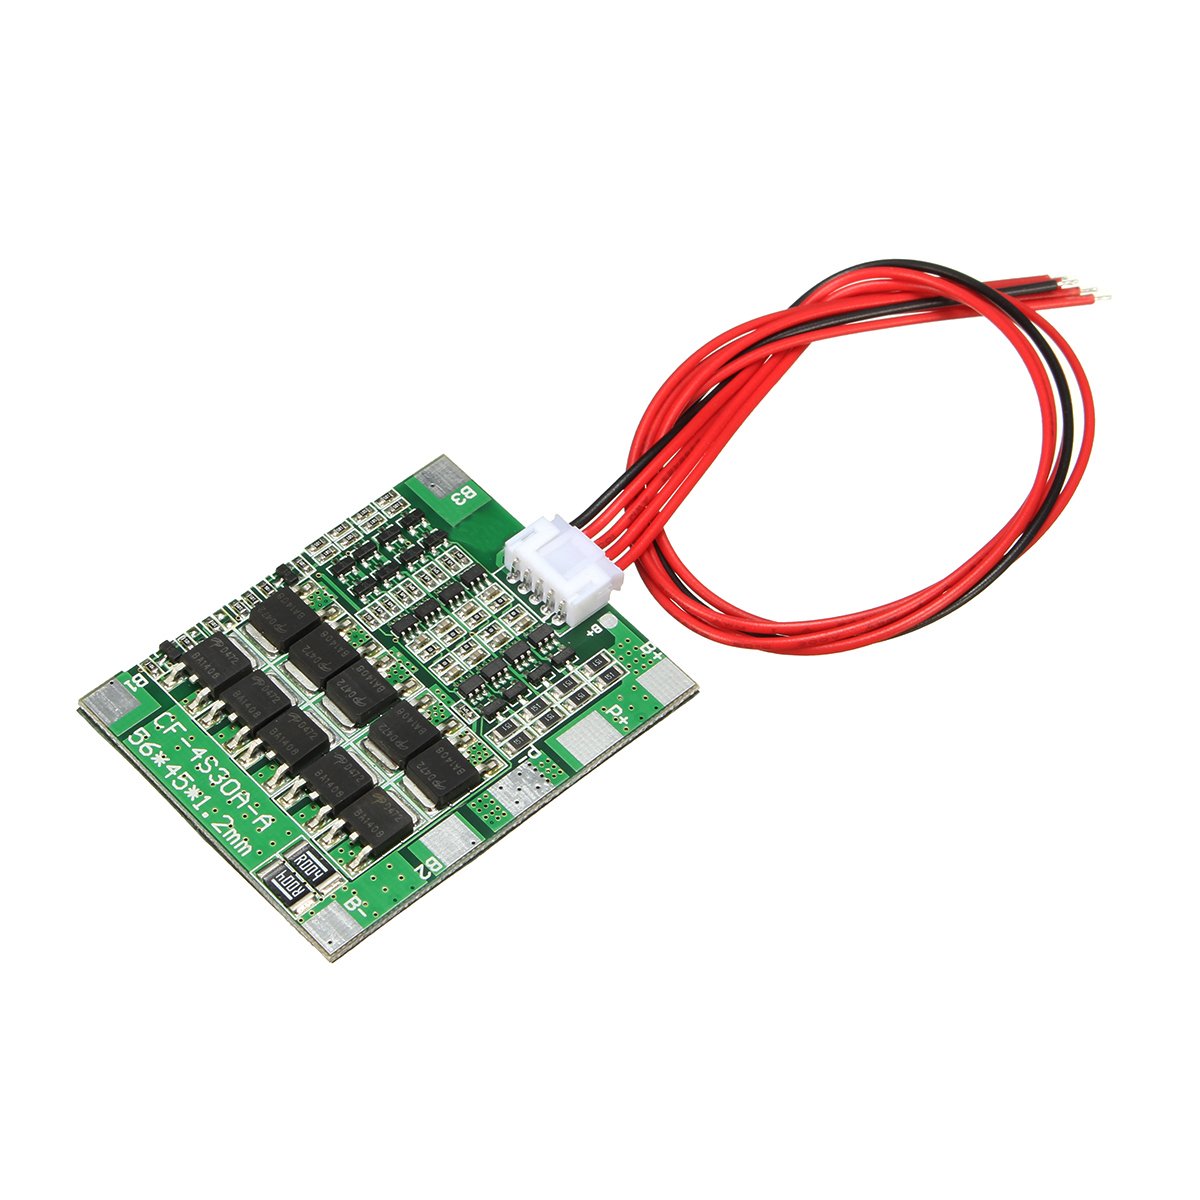 4-Series-30A-18650-Lithium-Battery-Protection-Board-14.8V-16V-with-Cable-10.jpg